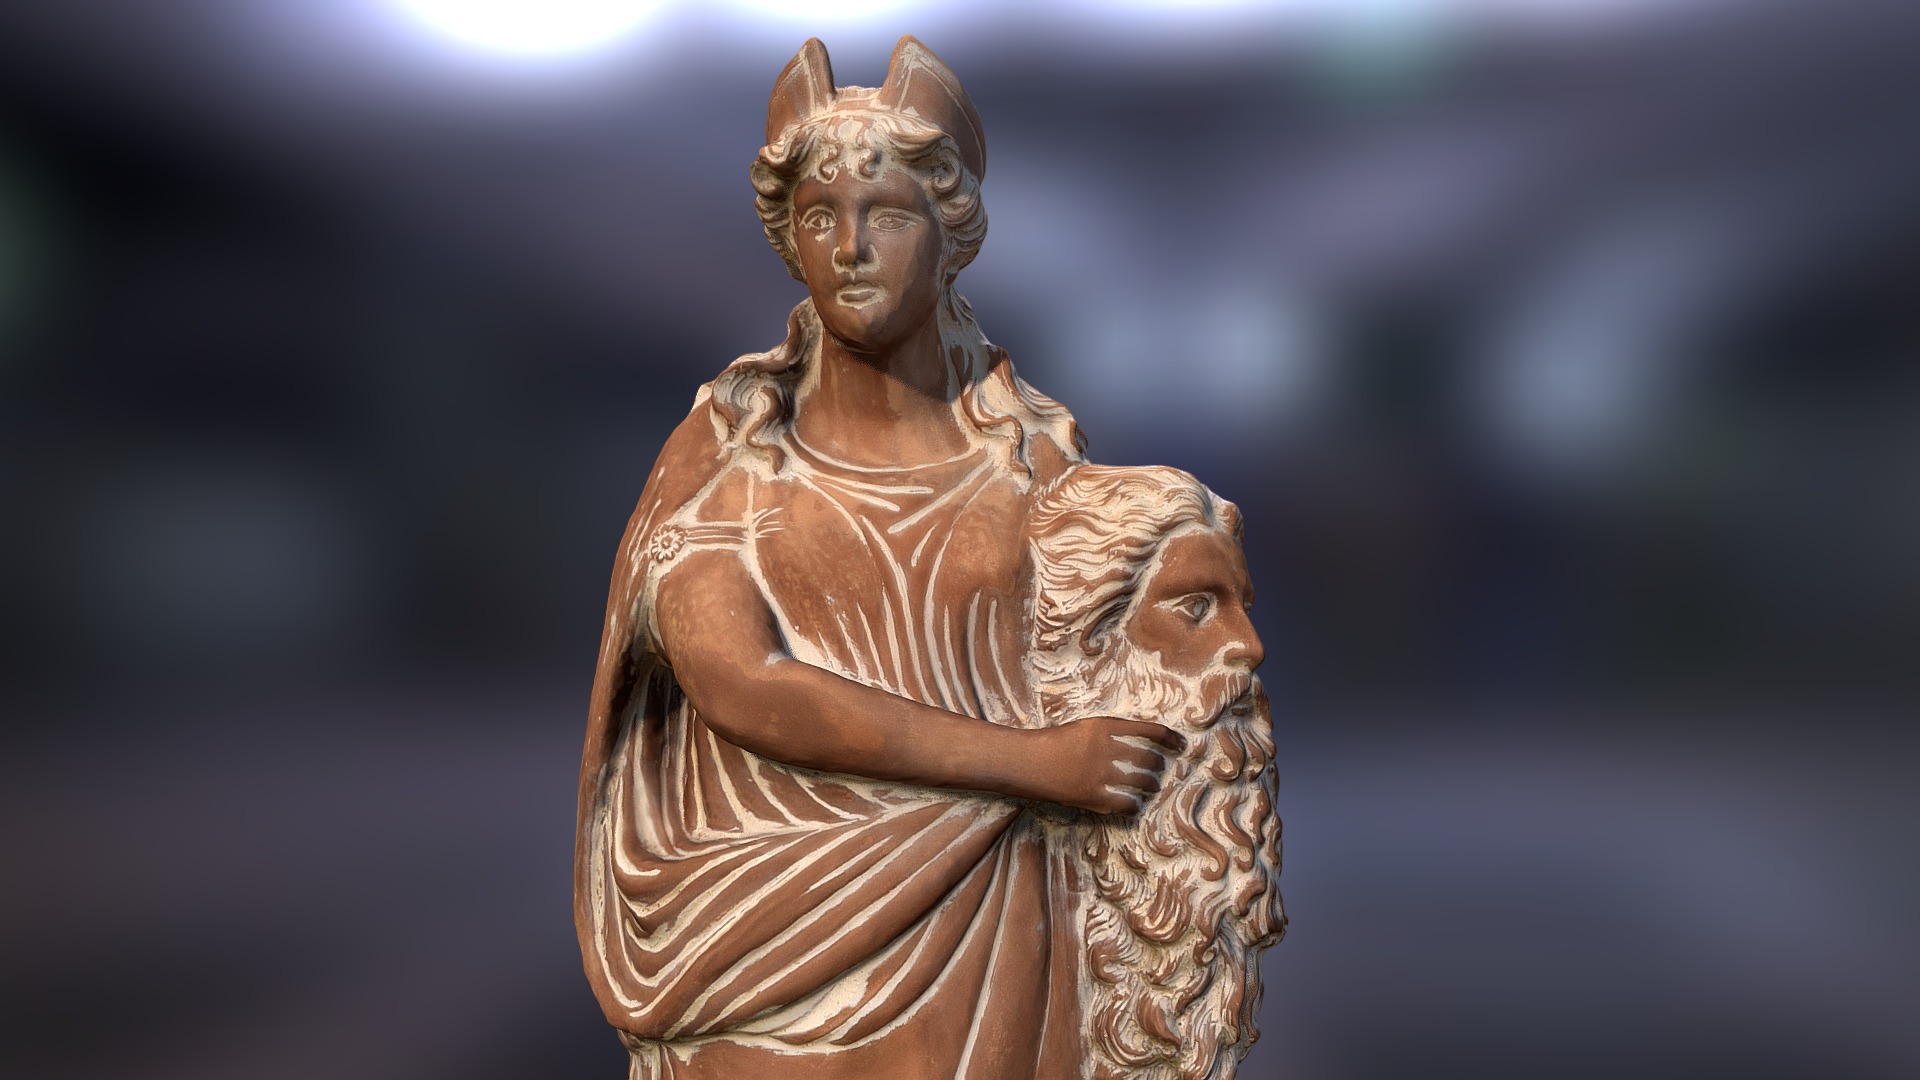 3D model Melpomene – Muse of Tragedy - This is a 3D model of the Melpomene - Muse of Tragedy. The 3D model is about a statue of a person holding a dog.